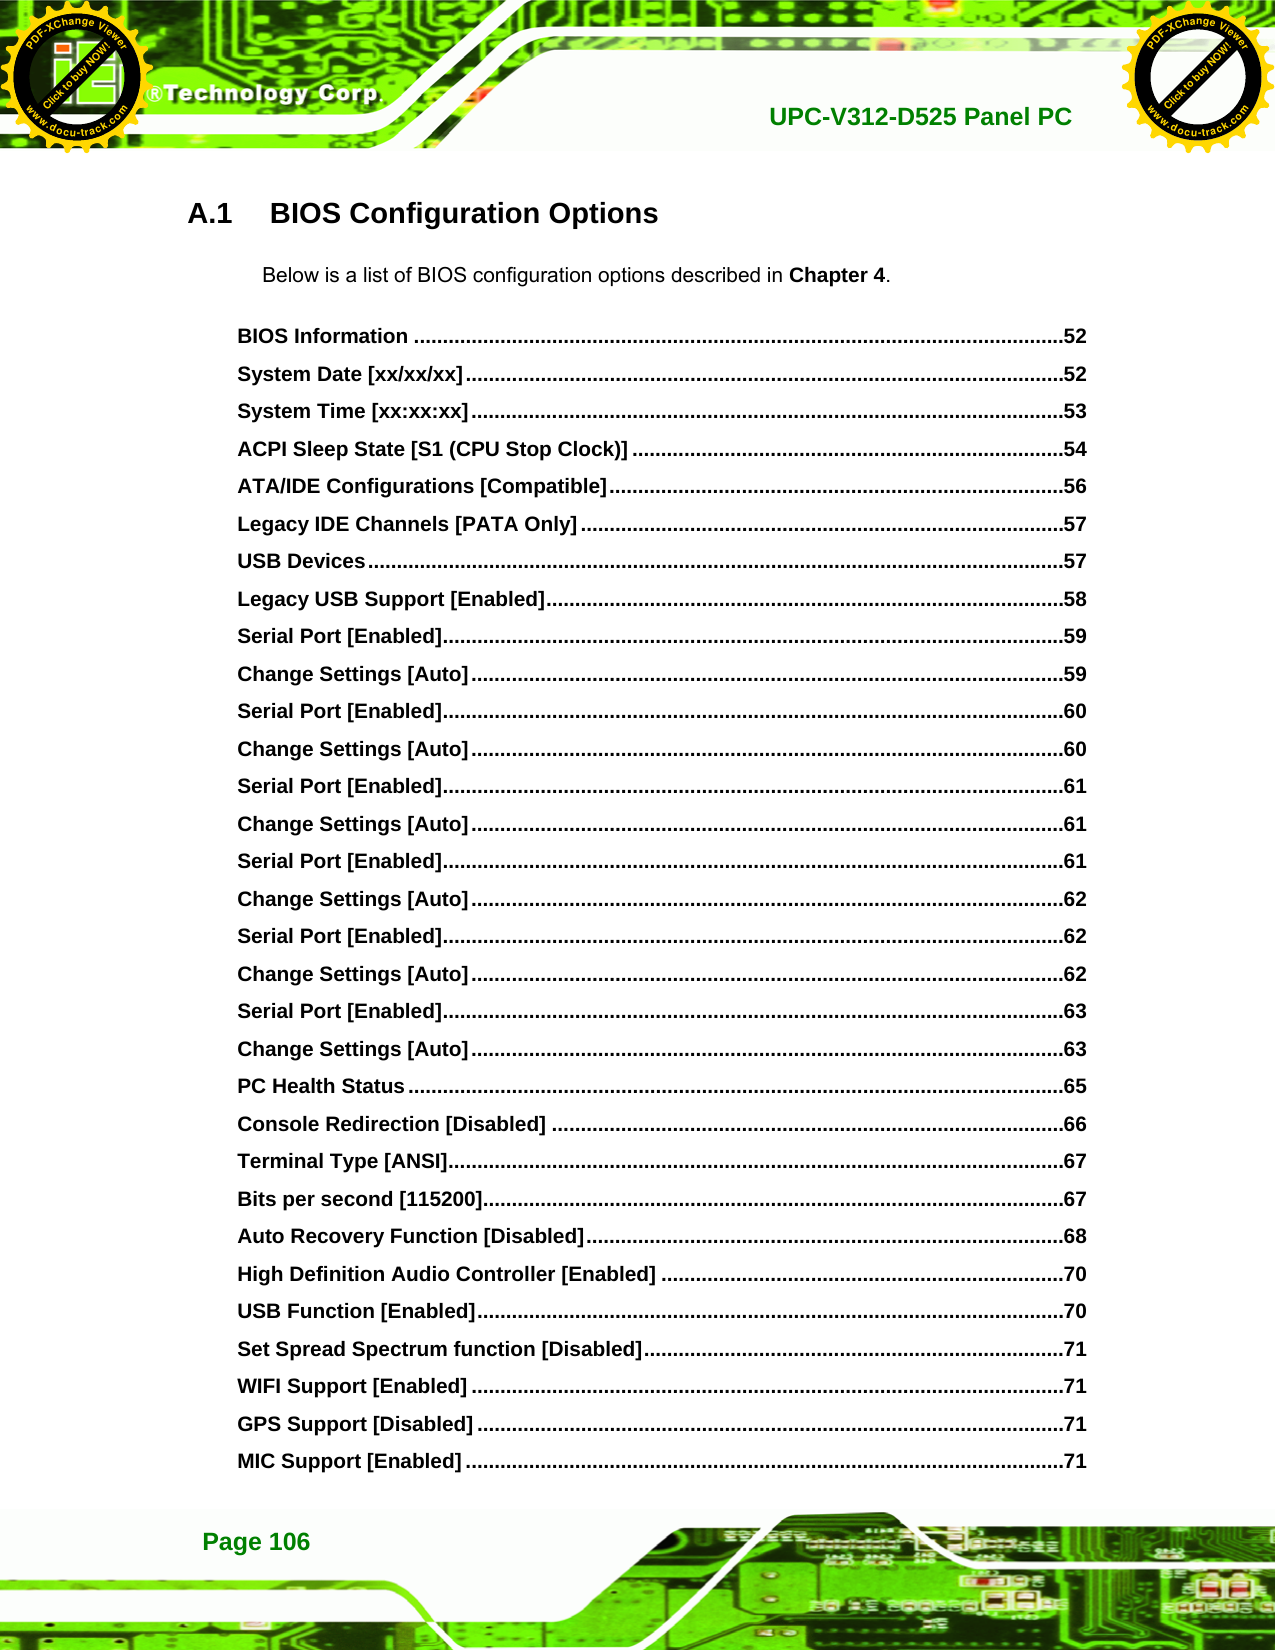   UPC-V312-D525 Panel PCPage 106 A.1   BIOS Configuration Options Below is a list of BIOS configuration options described in Chapter 664. 　 BIOS Information .................................................................................................................52 　 System Date [xx/xx/xx]........................................................................................................52 　 System Time [xx:xx:xx].......................................................................................................53 　 ACPI Sleep State [S1 (CPU Stop Clock)] ...........................................................................54 　 ATA/IDE Configurations [Compatible]...............................................................................56 　 Legacy IDE Channels [PATA Only]....................................................................................57 　 USB Devices.........................................................................................................................57 　 Legacy USB Support [Enabled]..........................................................................................58 　 Serial Port [Enabled]............................................................................................................59 　 Change Settings [Auto].......................................................................................................59 　 Serial Port [Enabled]............................................................................................................60 　 Change Settings [Auto].......................................................................................................60 　 Serial Port [Enabled]............................................................................................................61 　 Change Settings [Auto].......................................................................................................61 　 Serial Port [Enabled]............................................................................................................61 　 Change Settings [Auto].......................................................................................................62 　 Serial Port [Enabled]............................................................................................................62 　 Change Settings [Auto].......................................................................................................62 　 Serial Port [Enabled]............................................................................................................63 　 Change Settings [Auto].......................................................................................................63 　 PC Health Status..................................................................................................................65 　 Console Redirection [Disabled] .........................................................................................66 　 Terminal Type [ANSI]...........................................................................................................67 　 Bits per second [115200].....................................................................................................67 　 Auto Recovery Function [Disabled]...................................................................................68 　 High Definition Audio Controller [Enabled] ......................................................................70 　 USB Function [Enabled]......................................................................................................70 　 Set Spread Spectrum function [Disabled].........................................................................71 　 WIFI Support [Enabled] .......................................................................................................71 　 GPS Support [Disabled] ......................................................................................................71 　 MIC Support [Enabled] ........................................................................................................71 Click to buy NOW!PDF-XChange Viewerwww.docu-track.comClick to buy NOW!PDF-XChange Viewerwww.docu-track.com